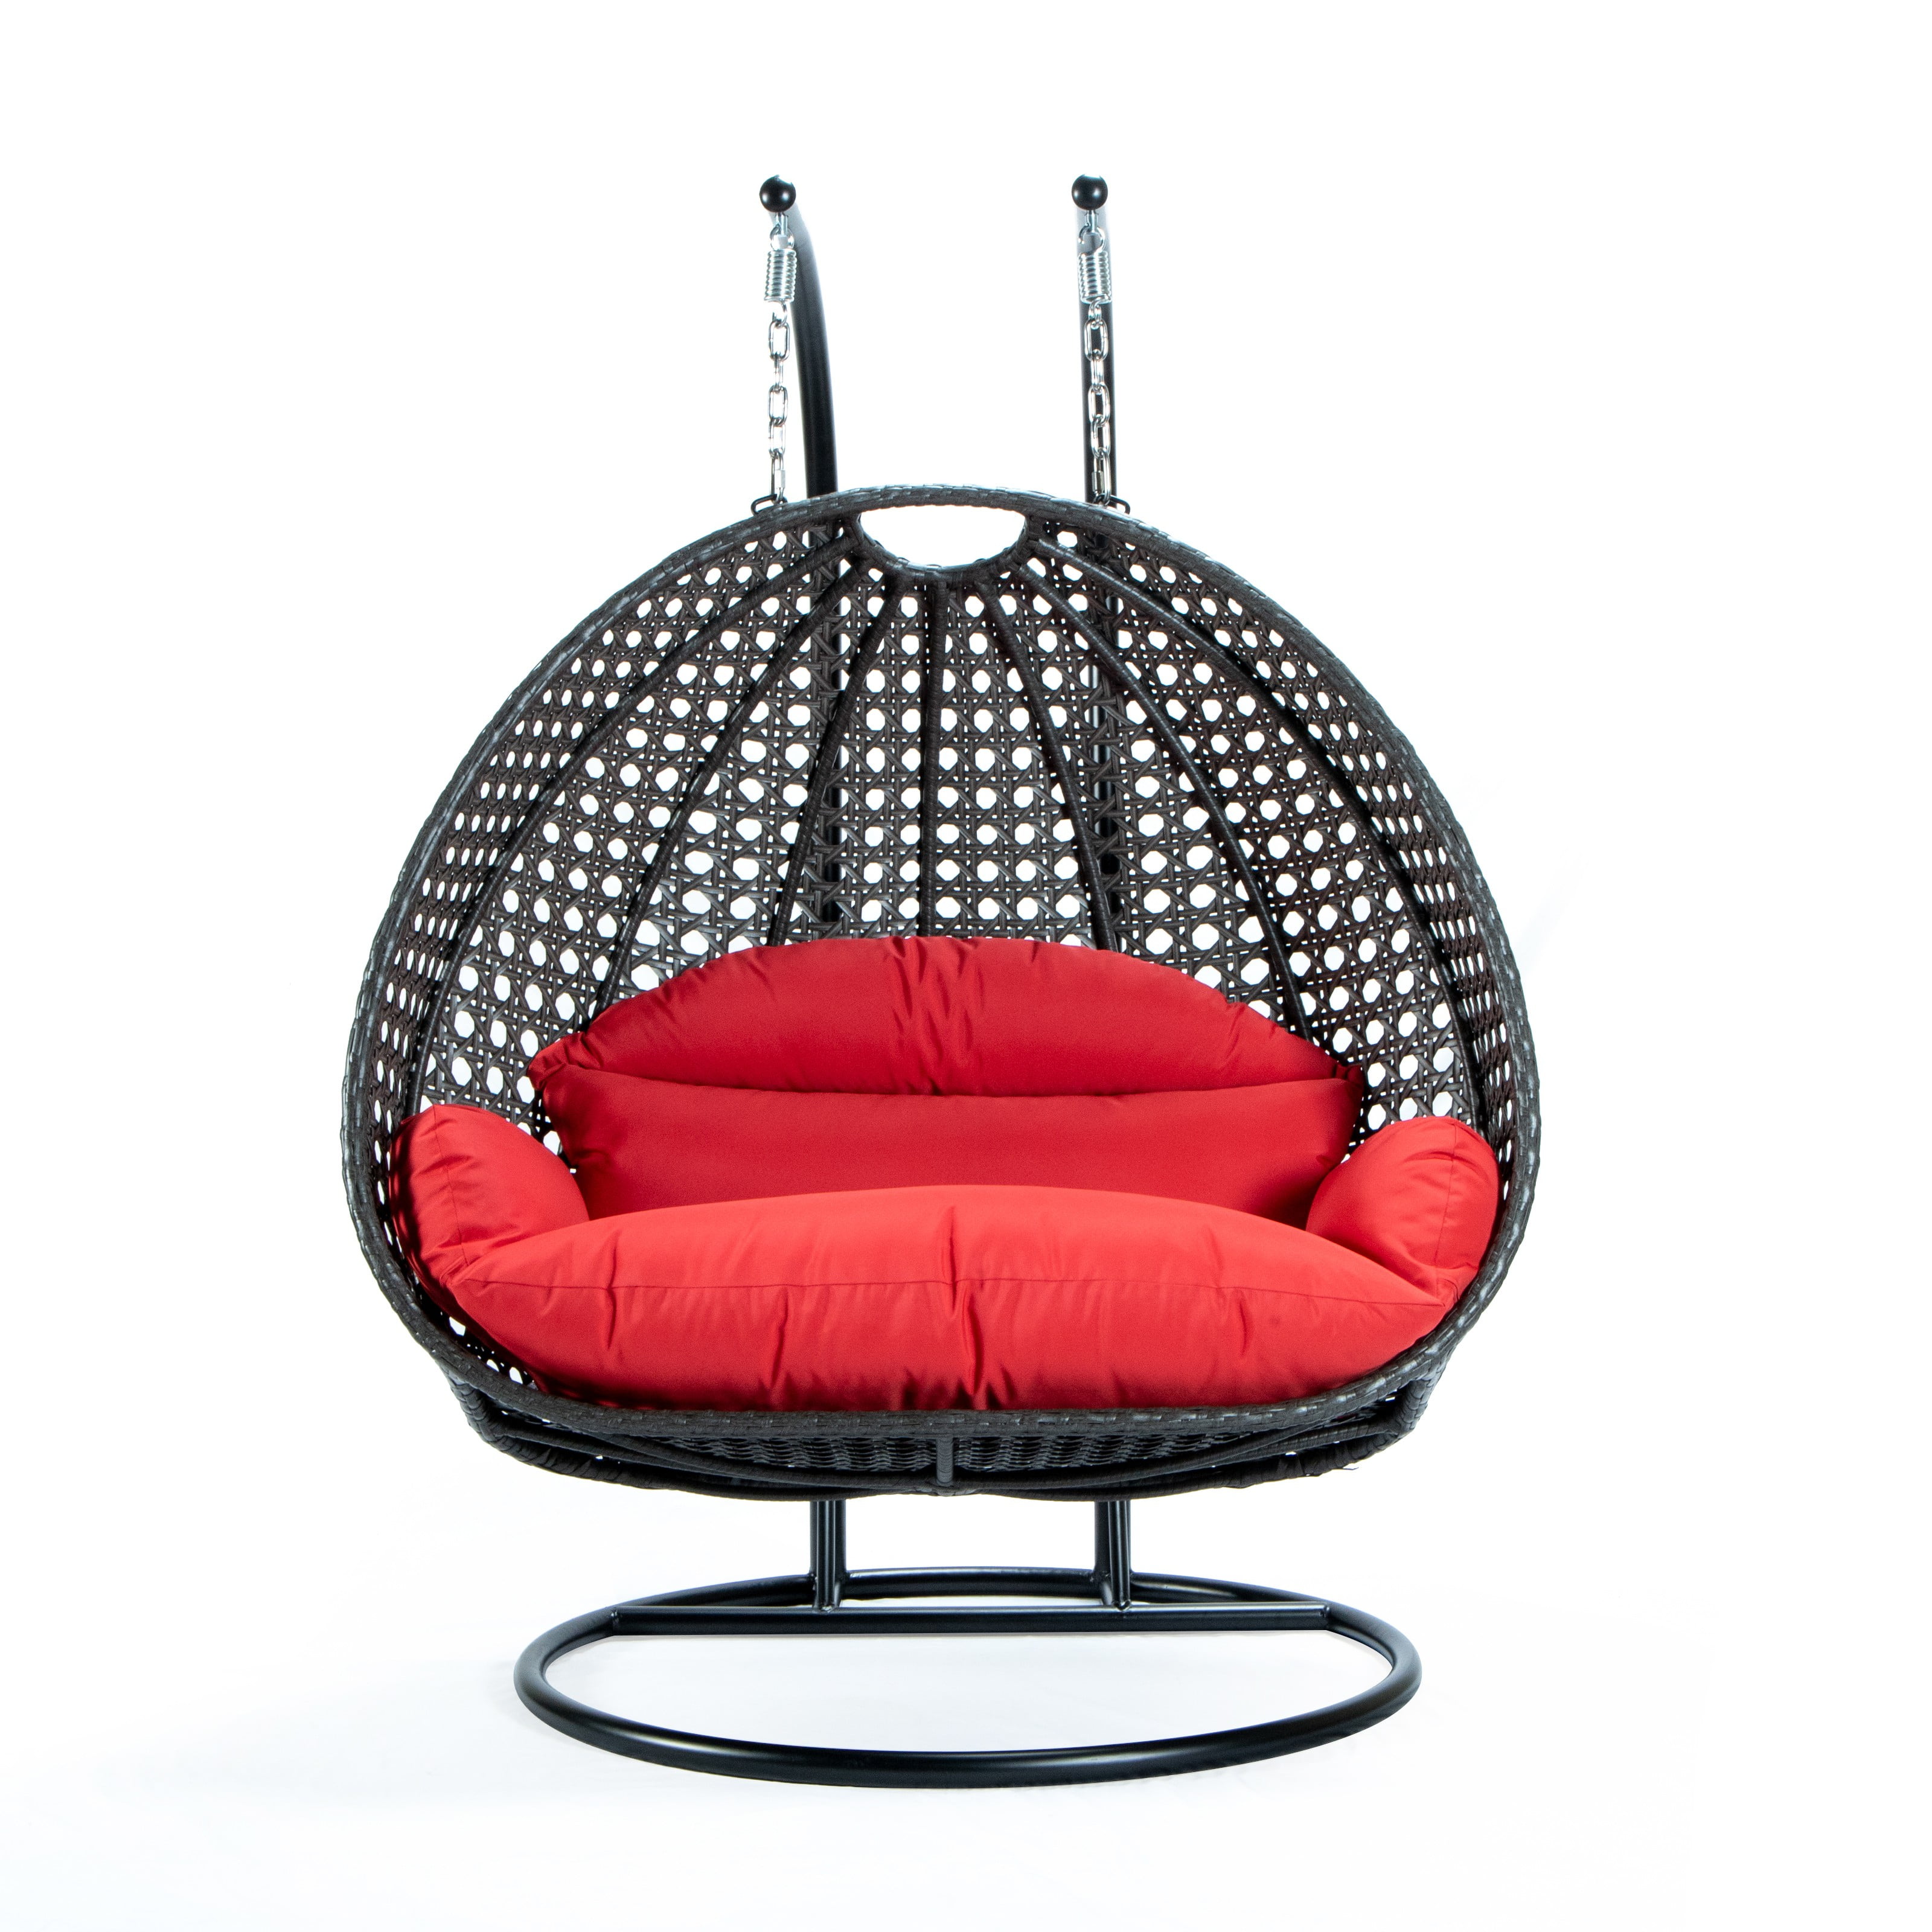 Minimalist Swing Chair Outdoor Walmart for Small Space